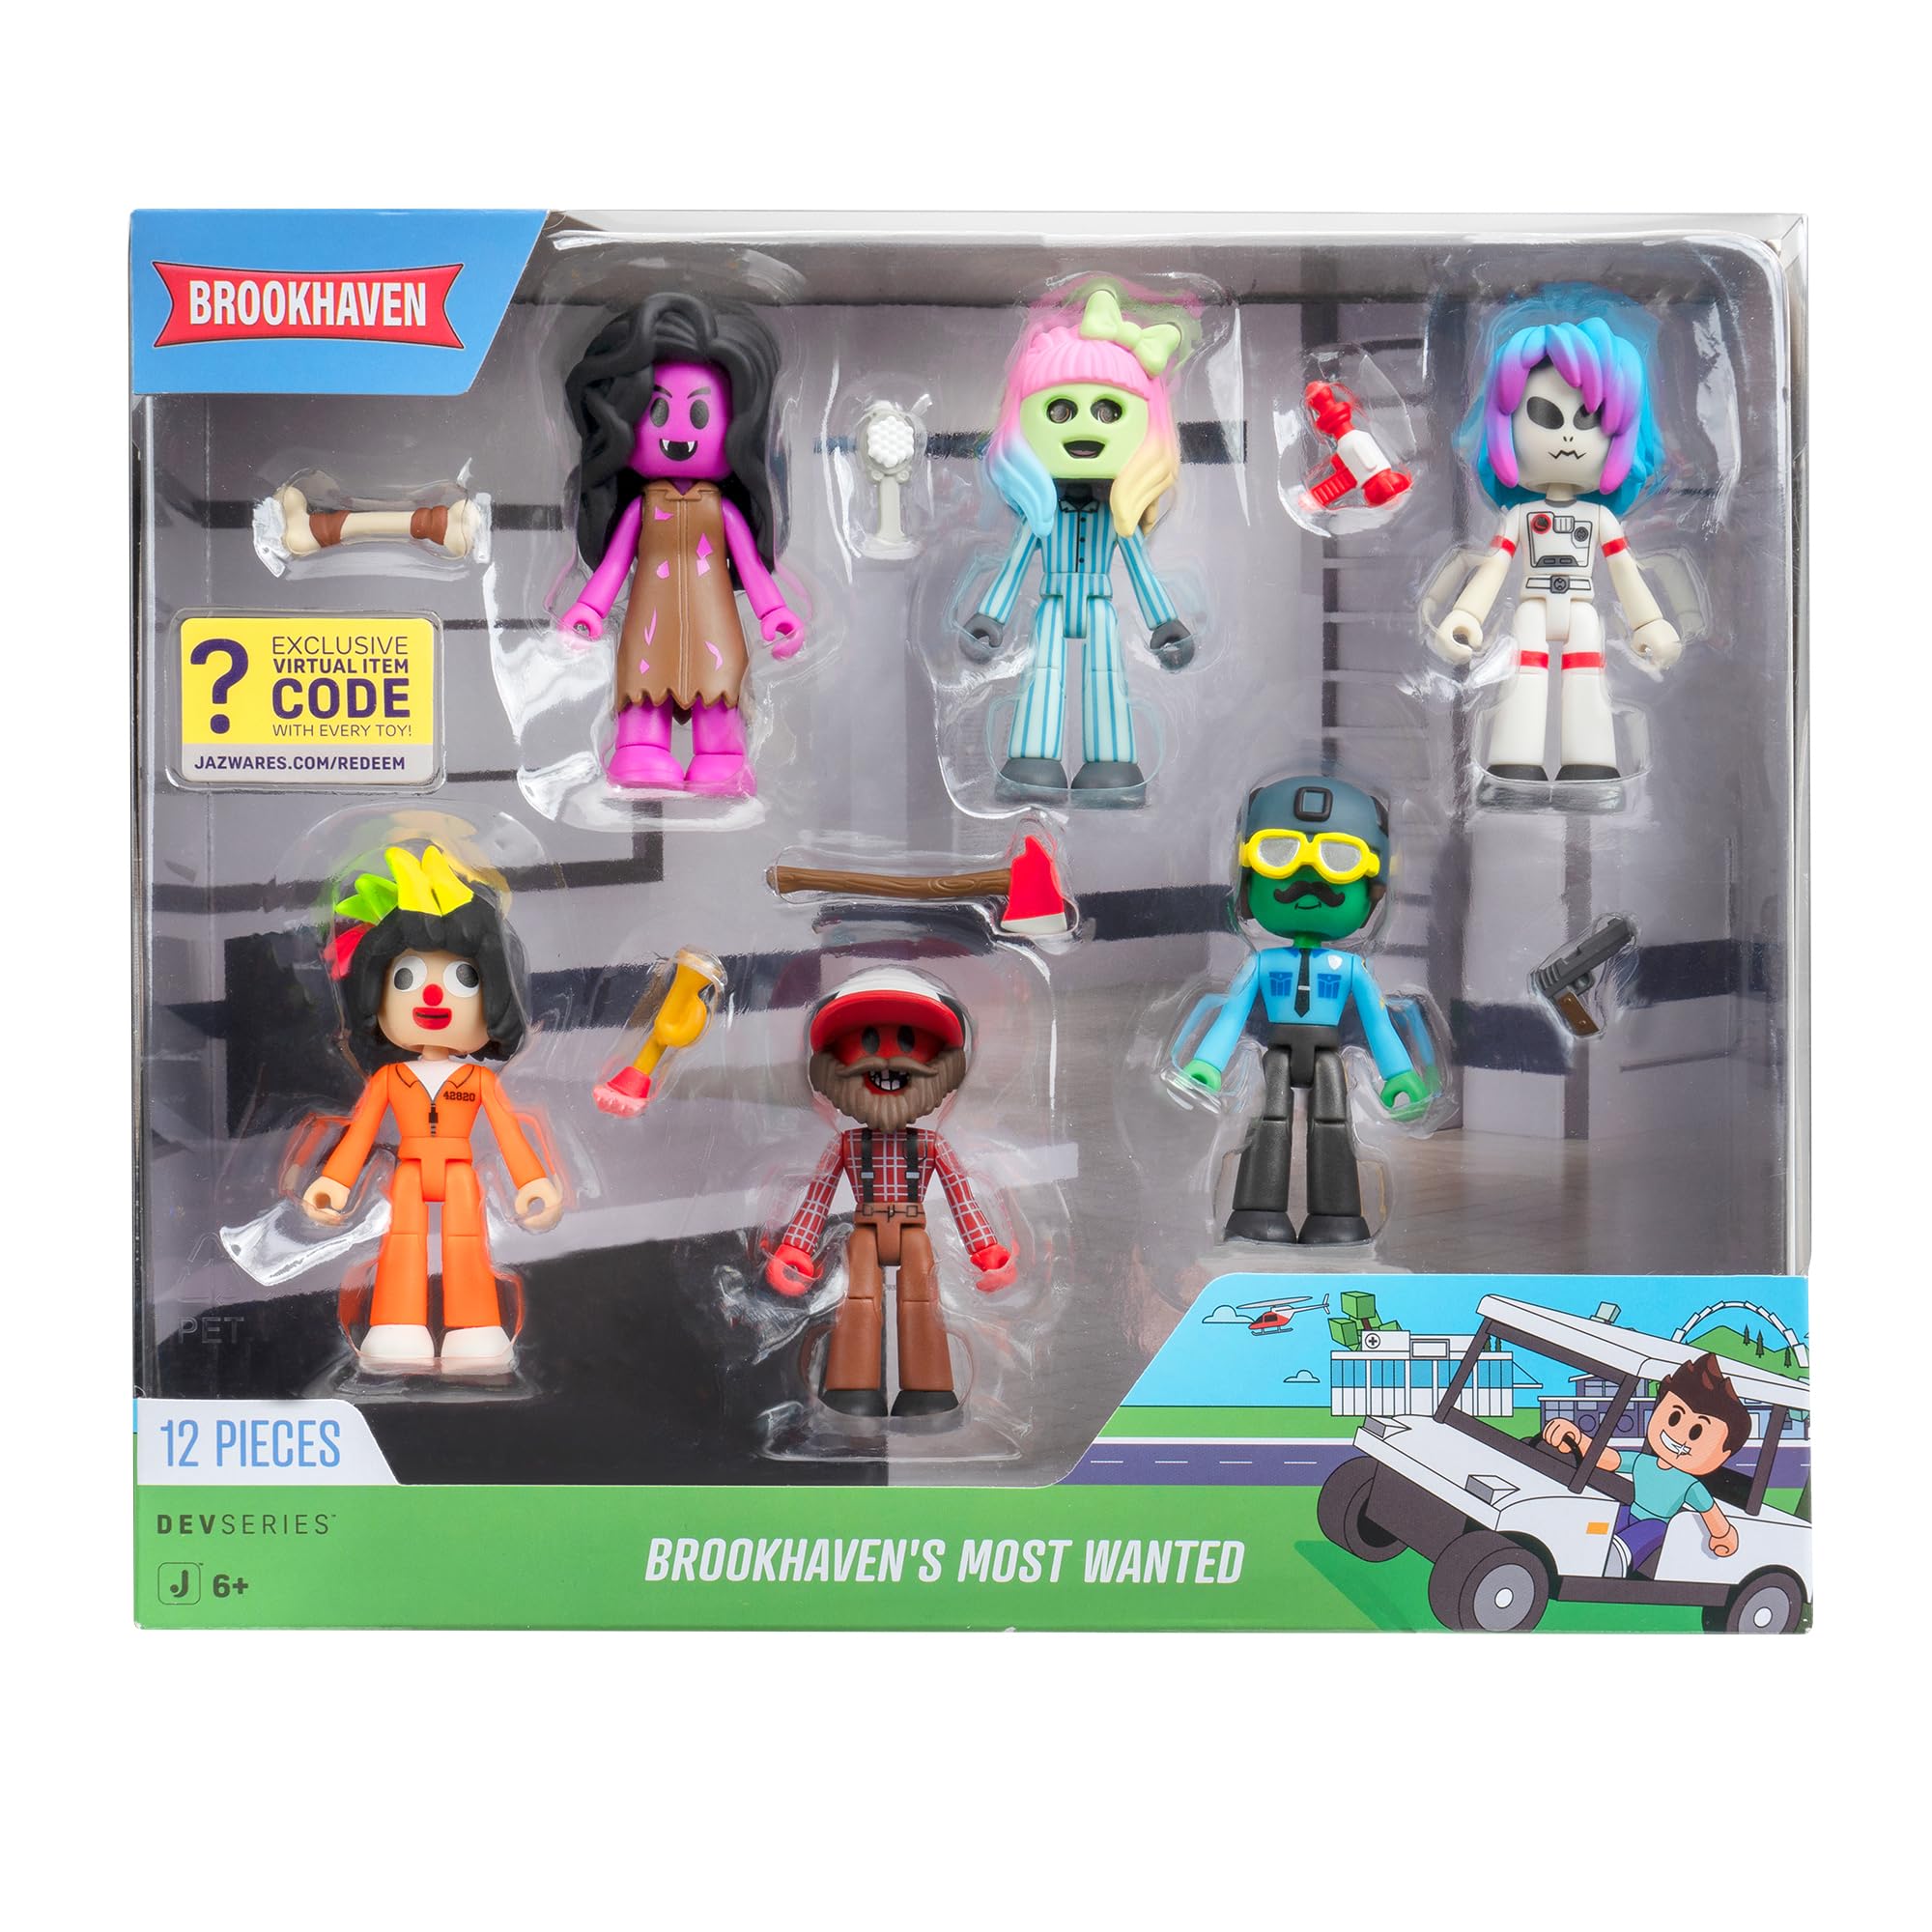 DevSeries Brookhaven's Most Wanted Six 2.75-Inch Mix-and-Match Figures with Unique Accessories and Exclusive Virtual Item Code